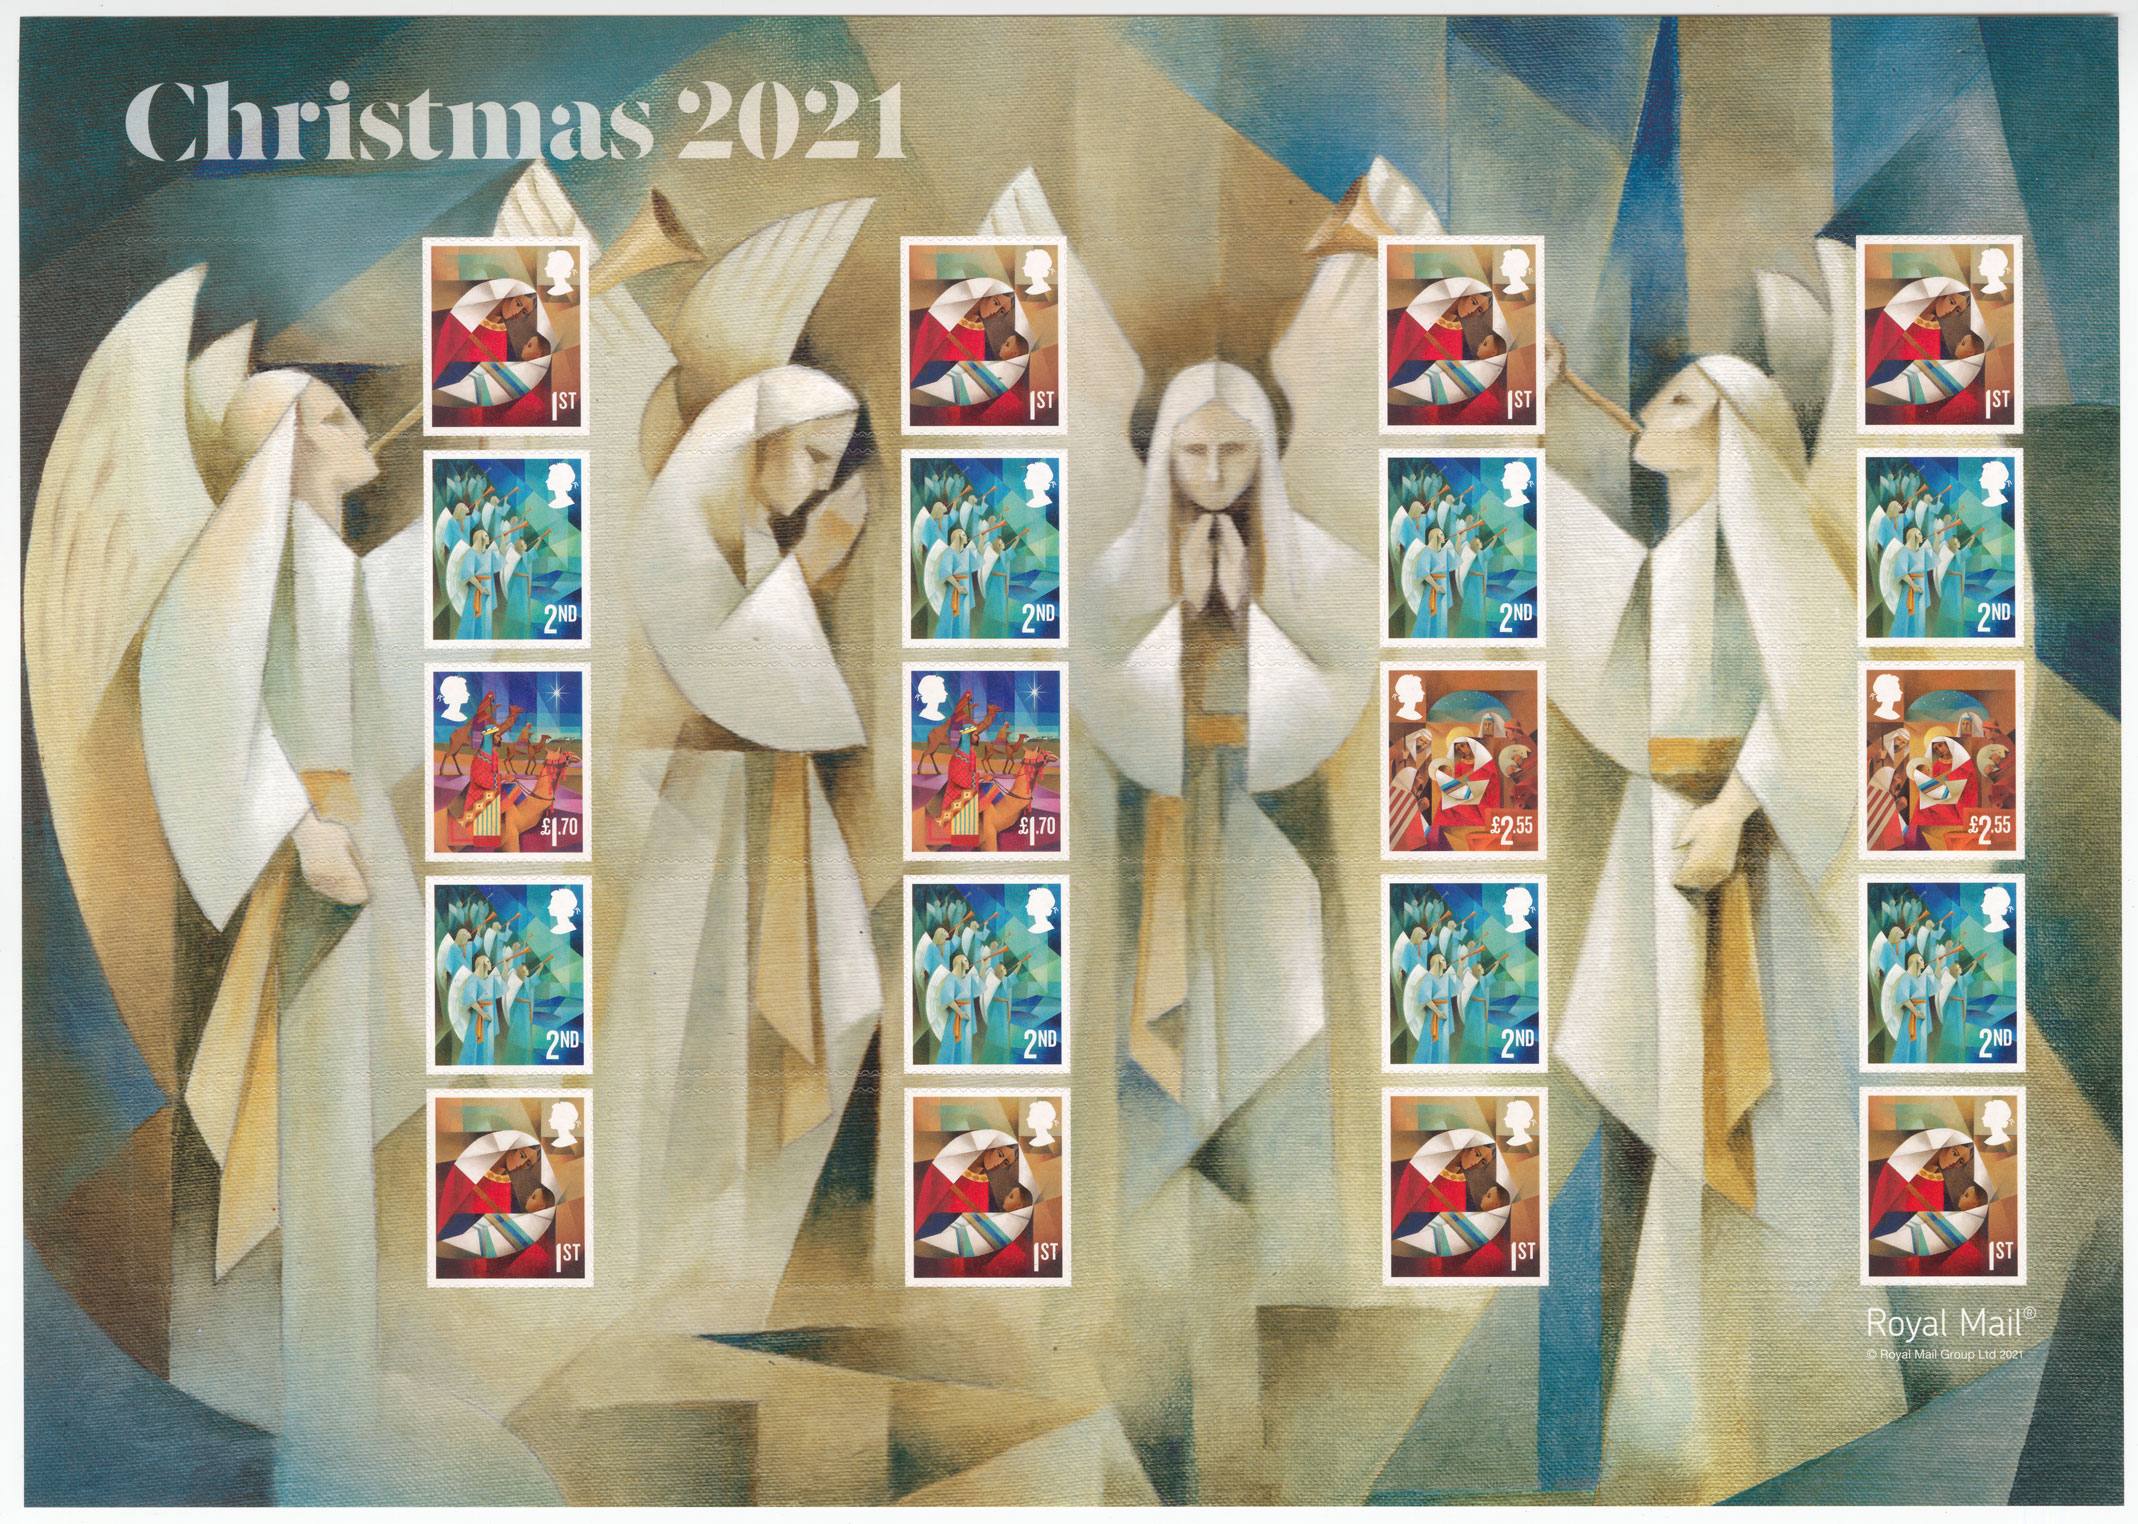 A sheet of 20 stamp and 20 labels featuring images of angels in the background. 